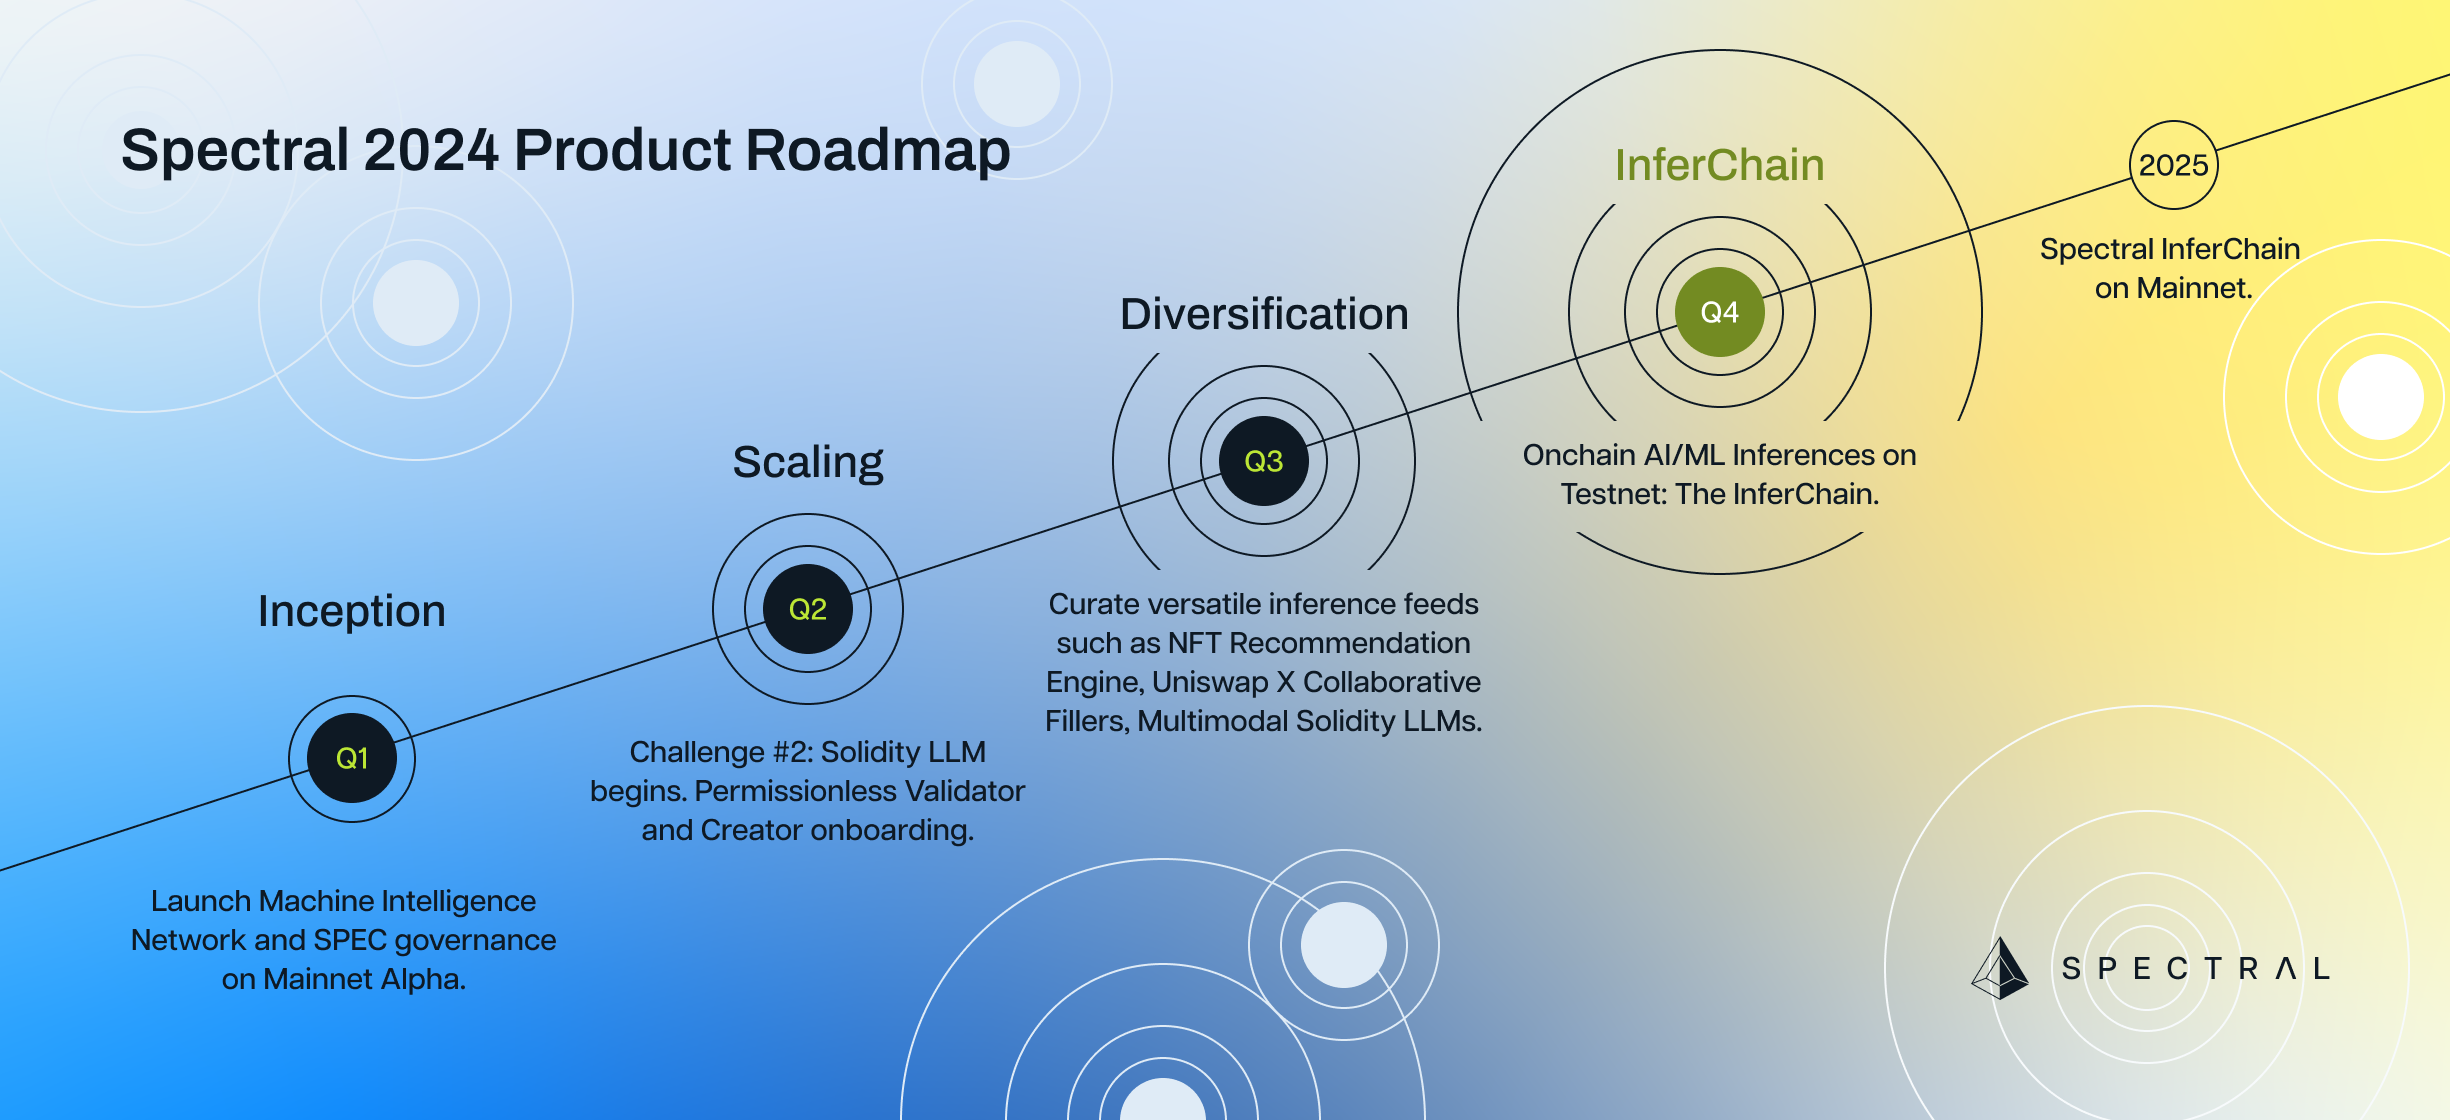 Path to the InferChain: Spectral’s 2024 Roadmap